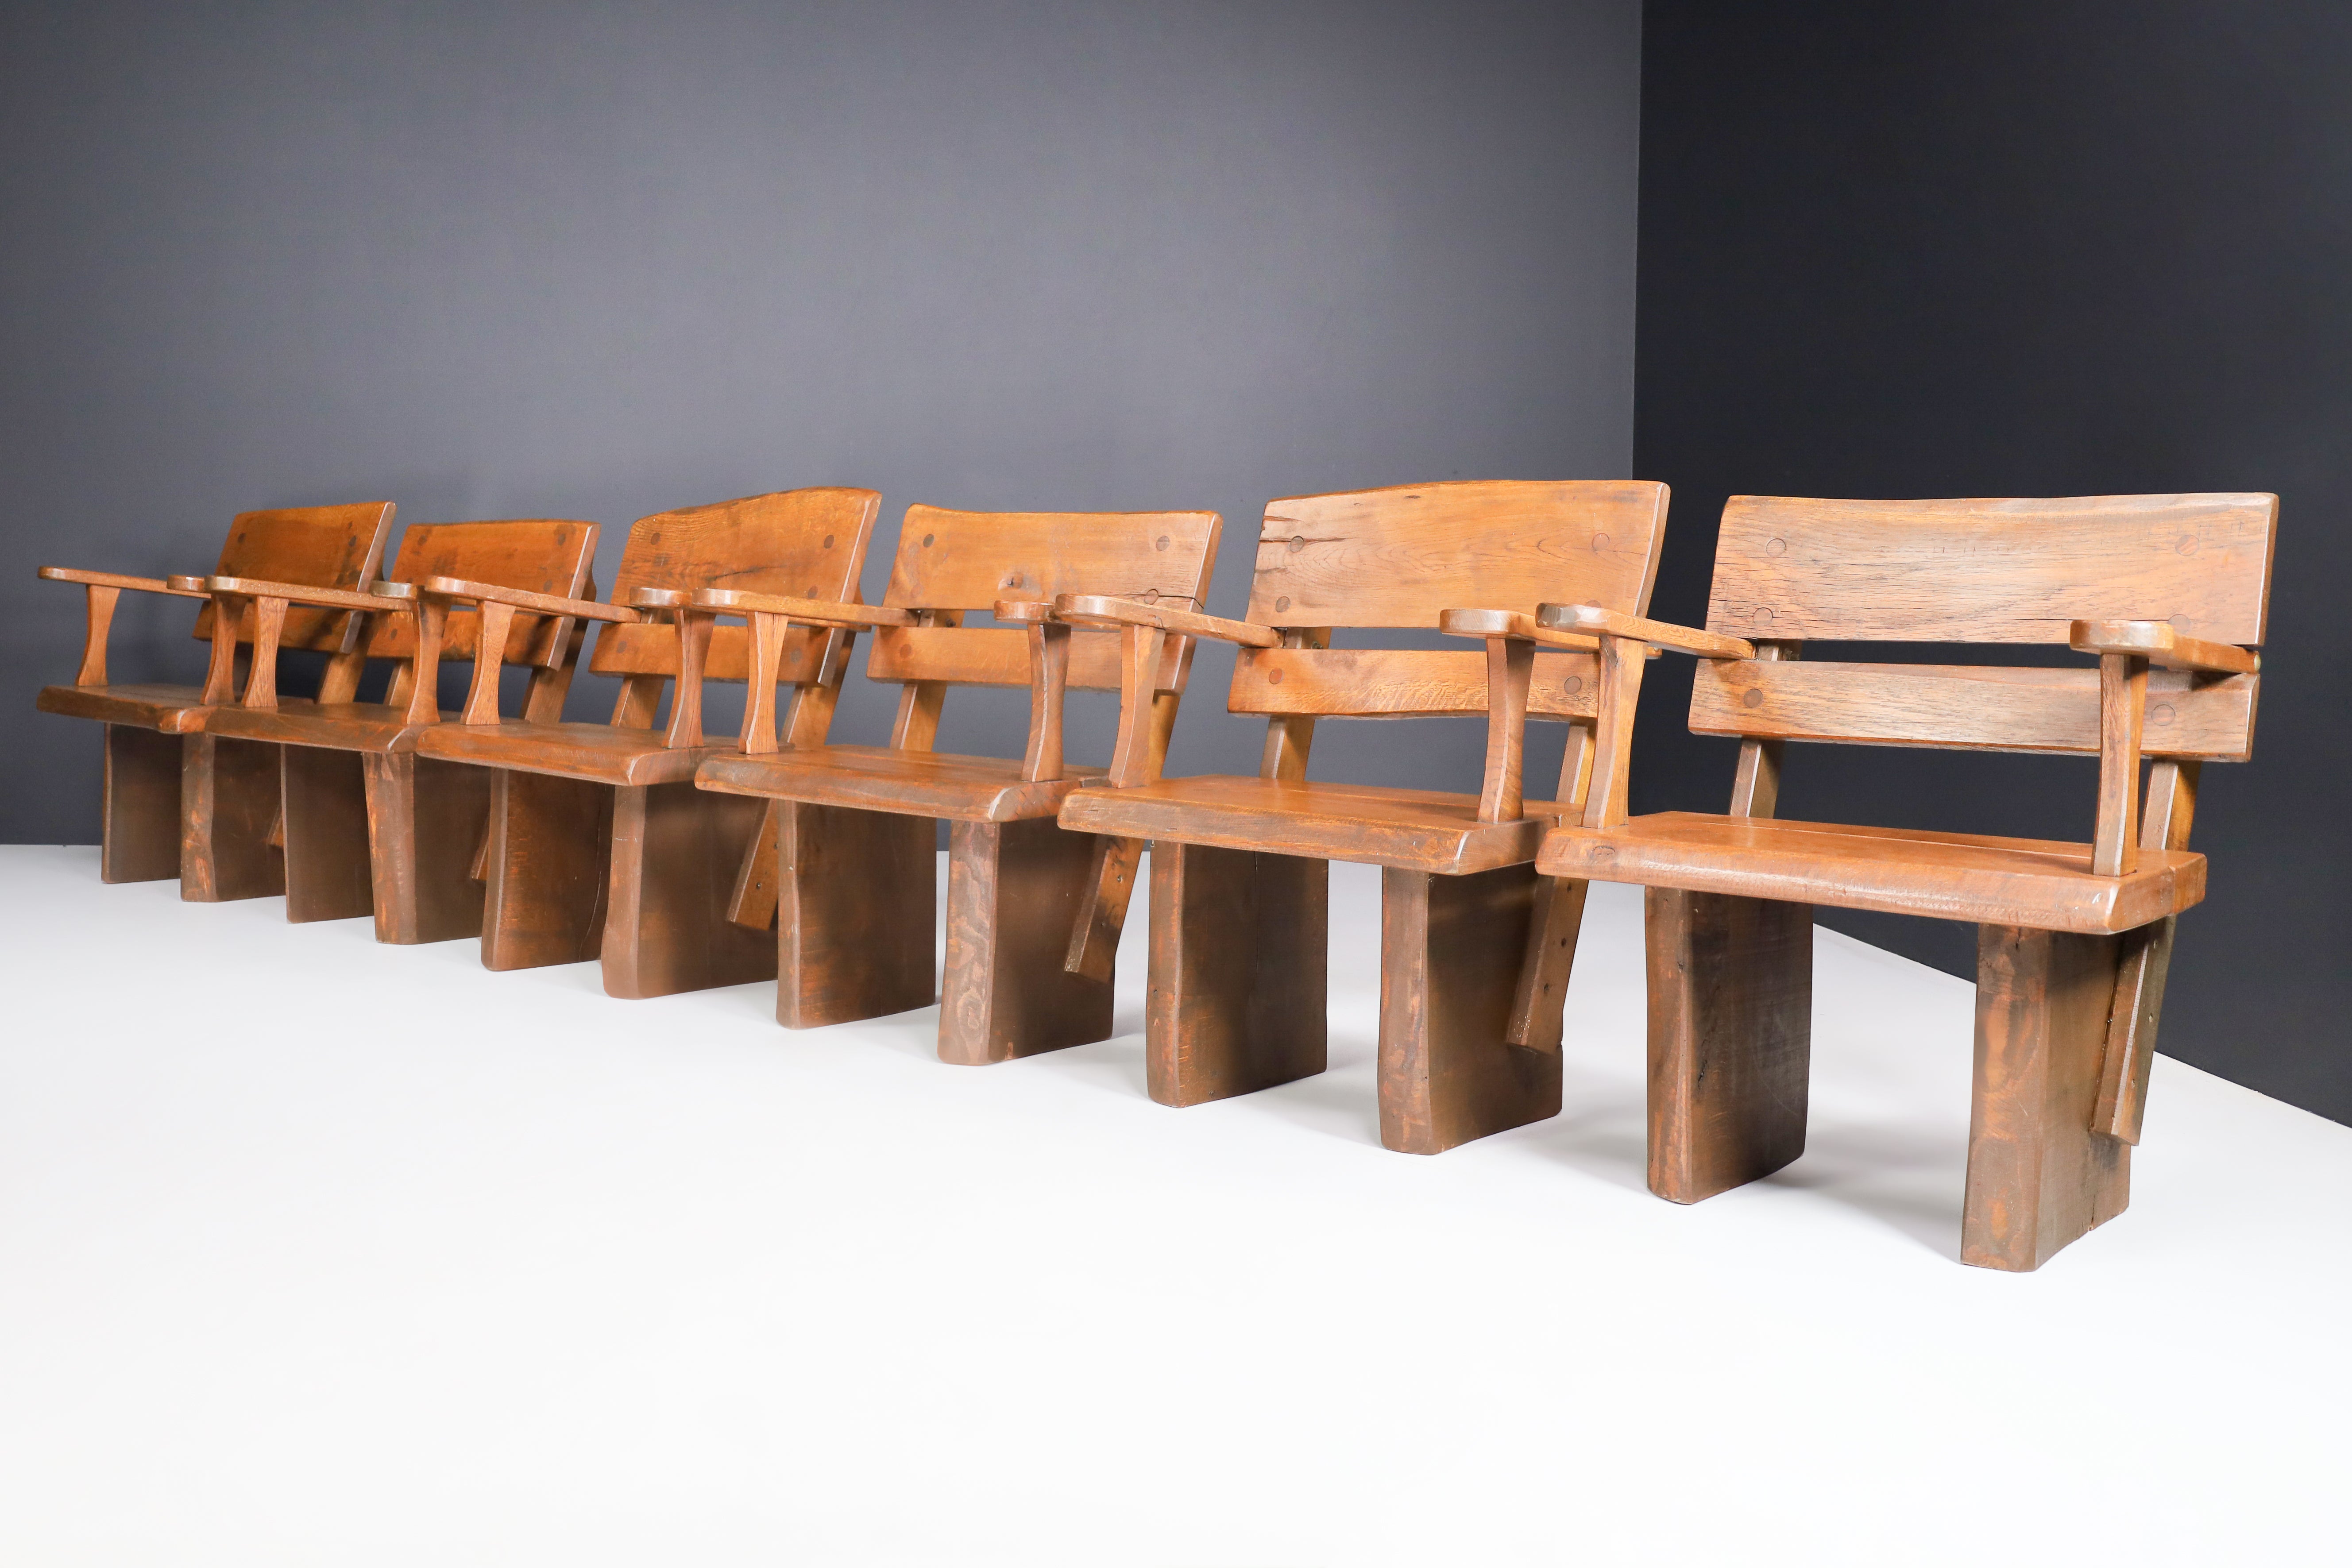 Set of six Brutalist sculptural arm chairs in oak, France, 1960s.

Set of six brutalist sculptural armchairs, these chairs are made of French oak and sculpturally crafted by hand in France in the 1960s. The craftsmanship is still visible; they are